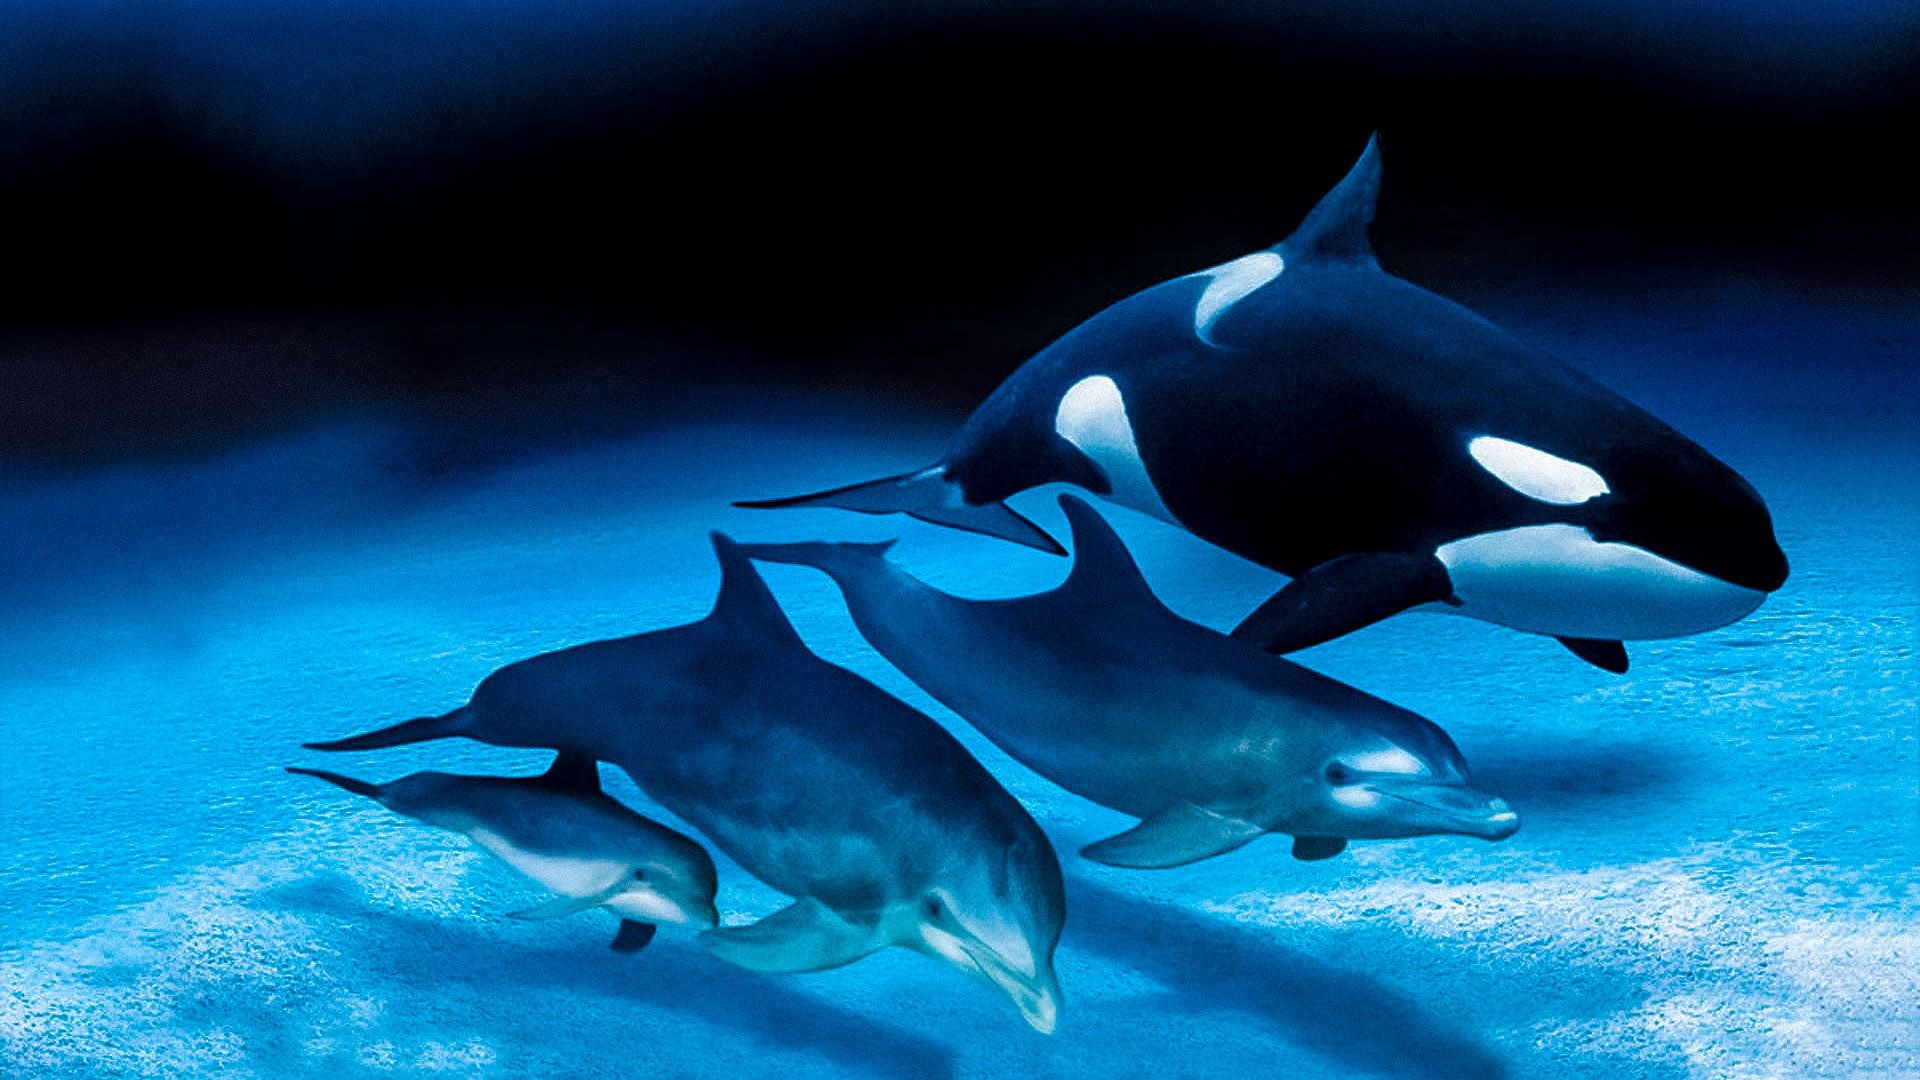 Dolphins and Whales 3D: Tribes of the Ocean background